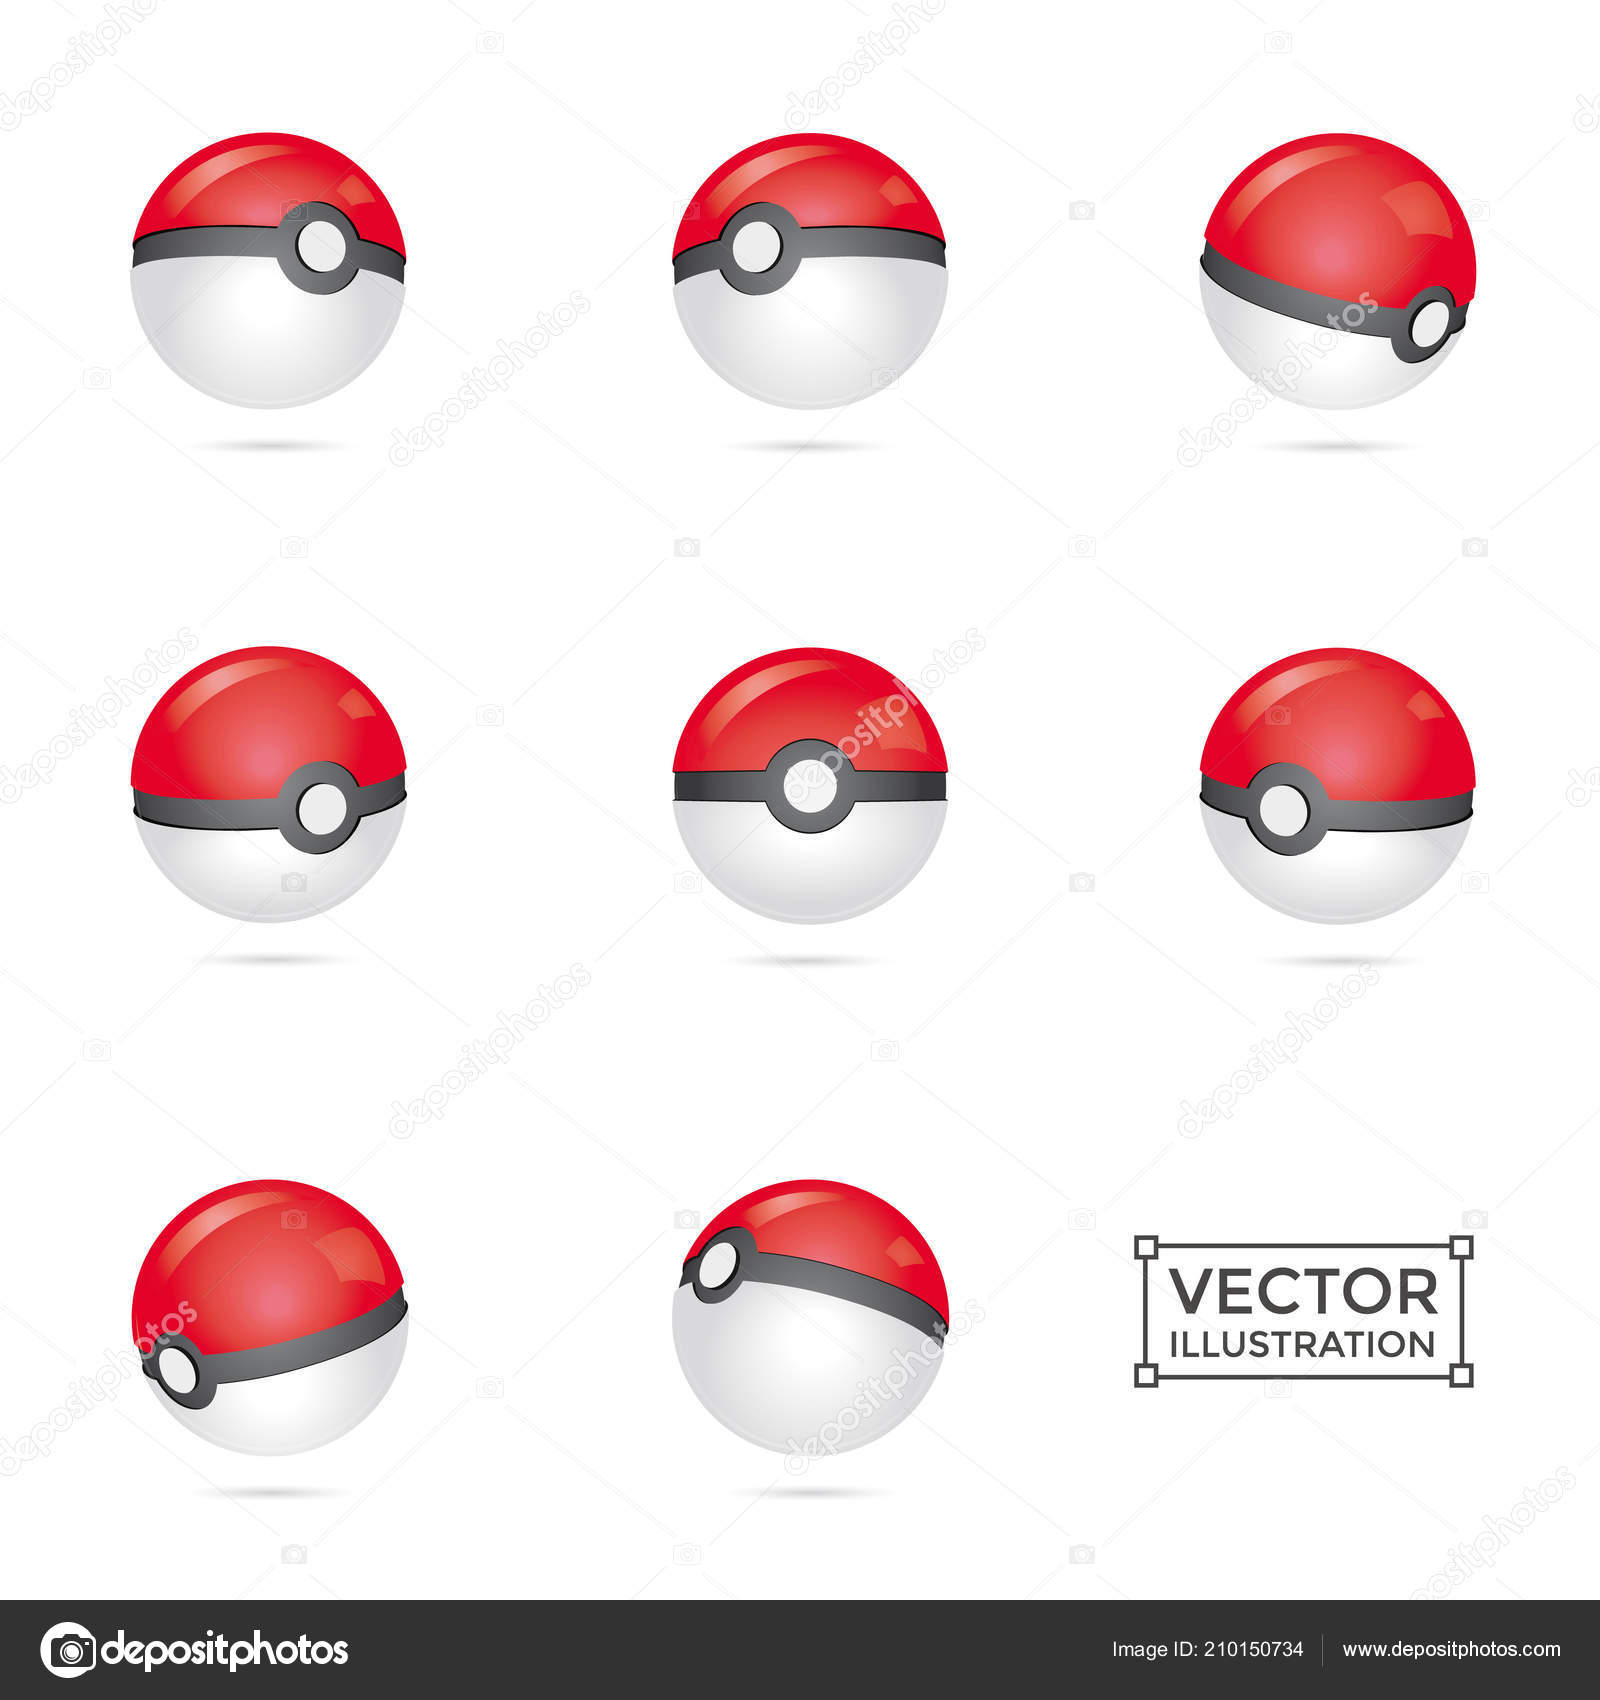 Pokeball icon vector isolated on white background, logo concept of